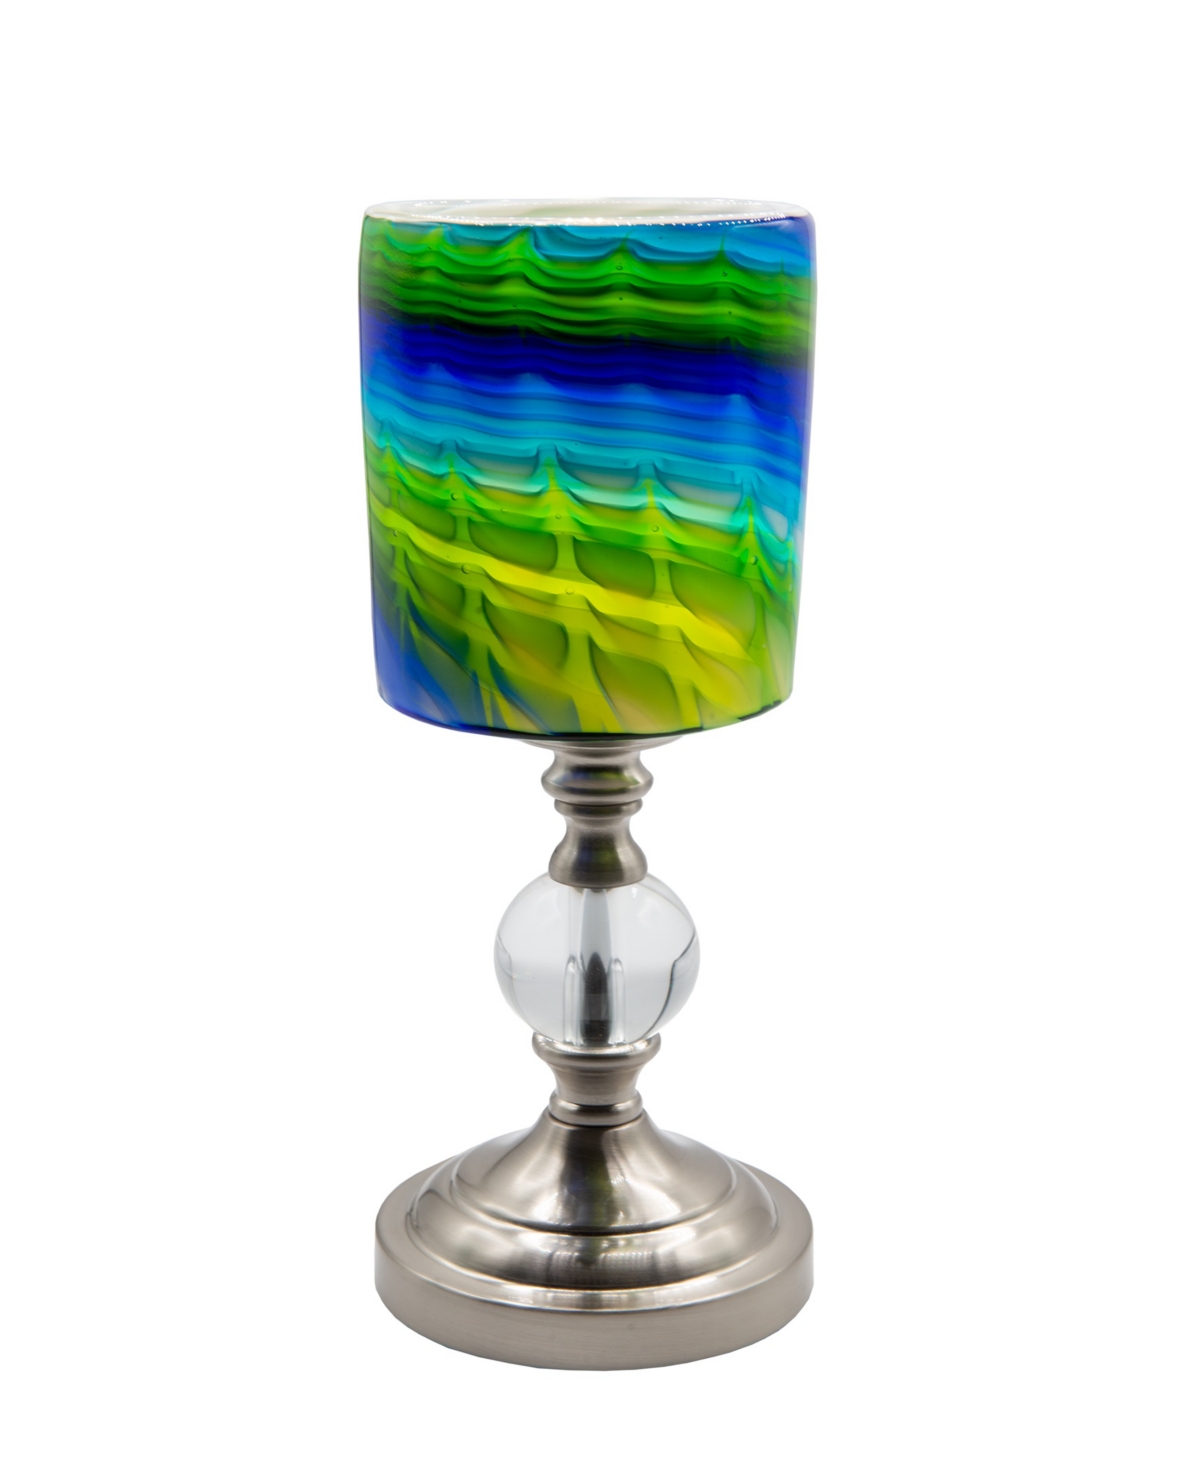 Shop Dale Tiffany 13.5" Tall Summerland Hand Blown Art Glass Shade Accent Lamp In Multi-color